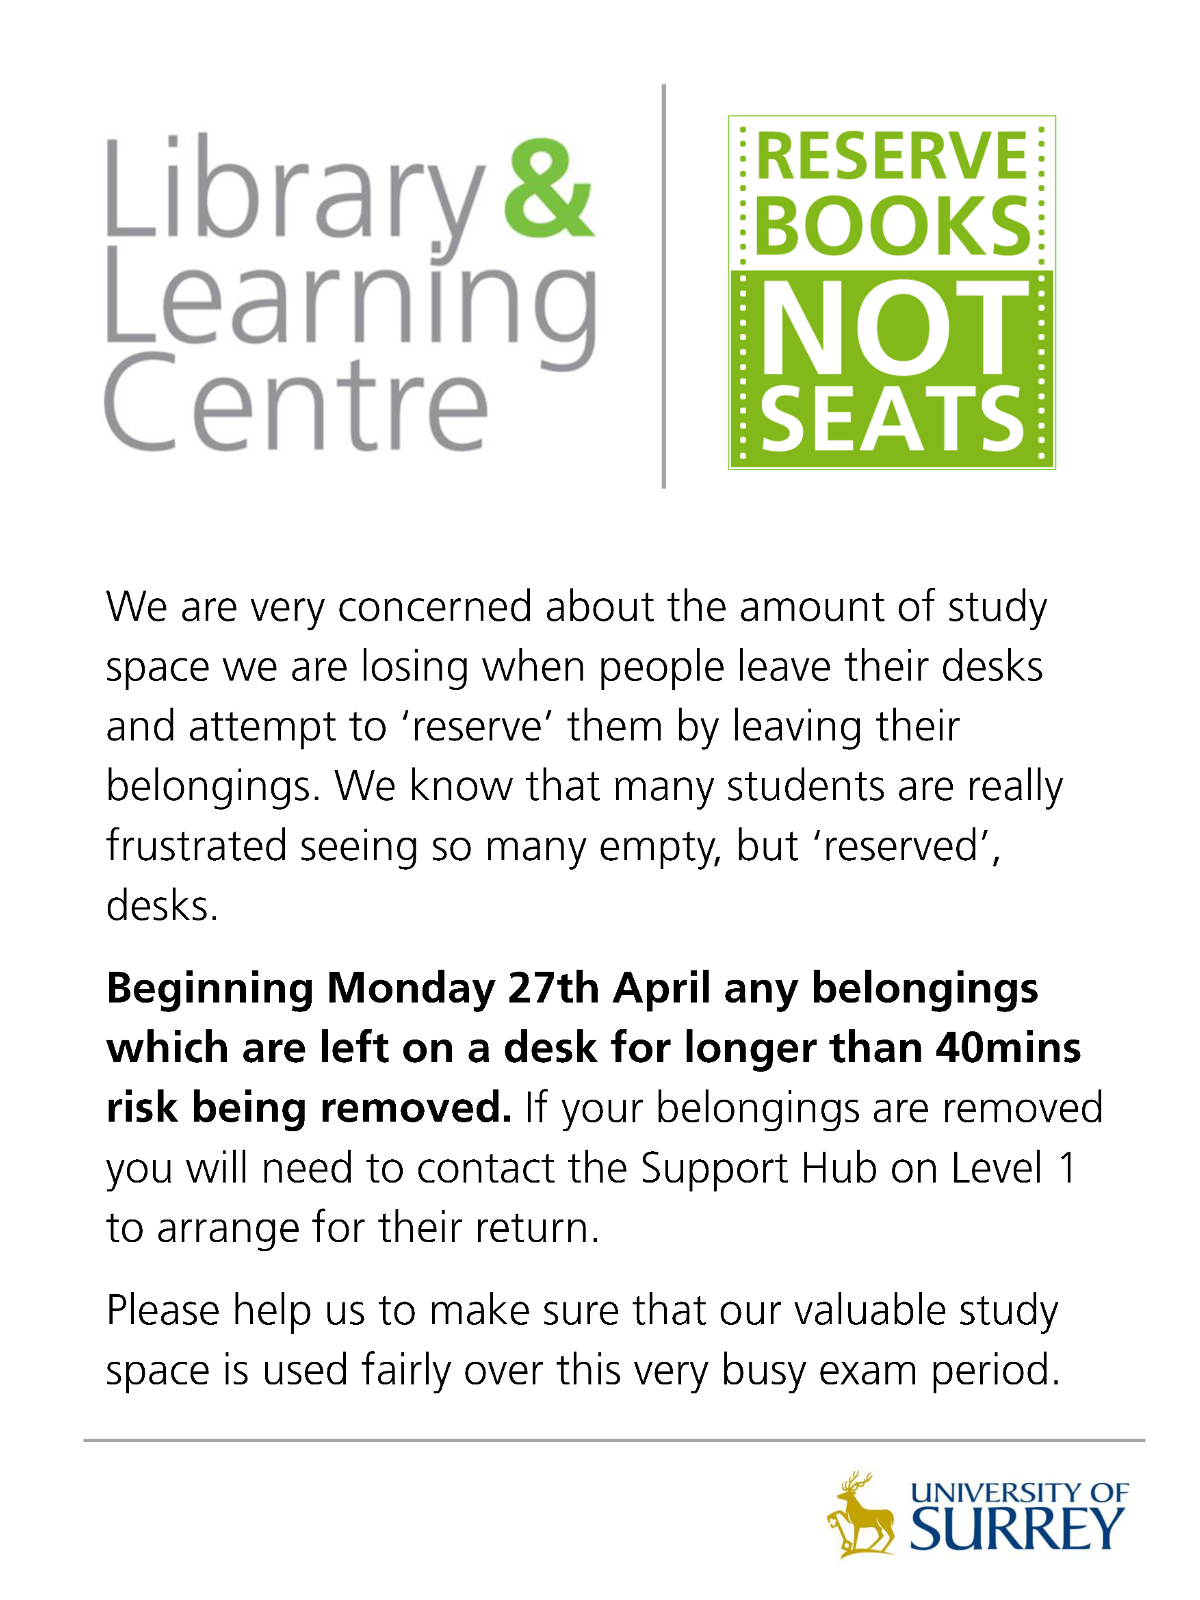 Reserve books not seats flyer (image 1200x1600)